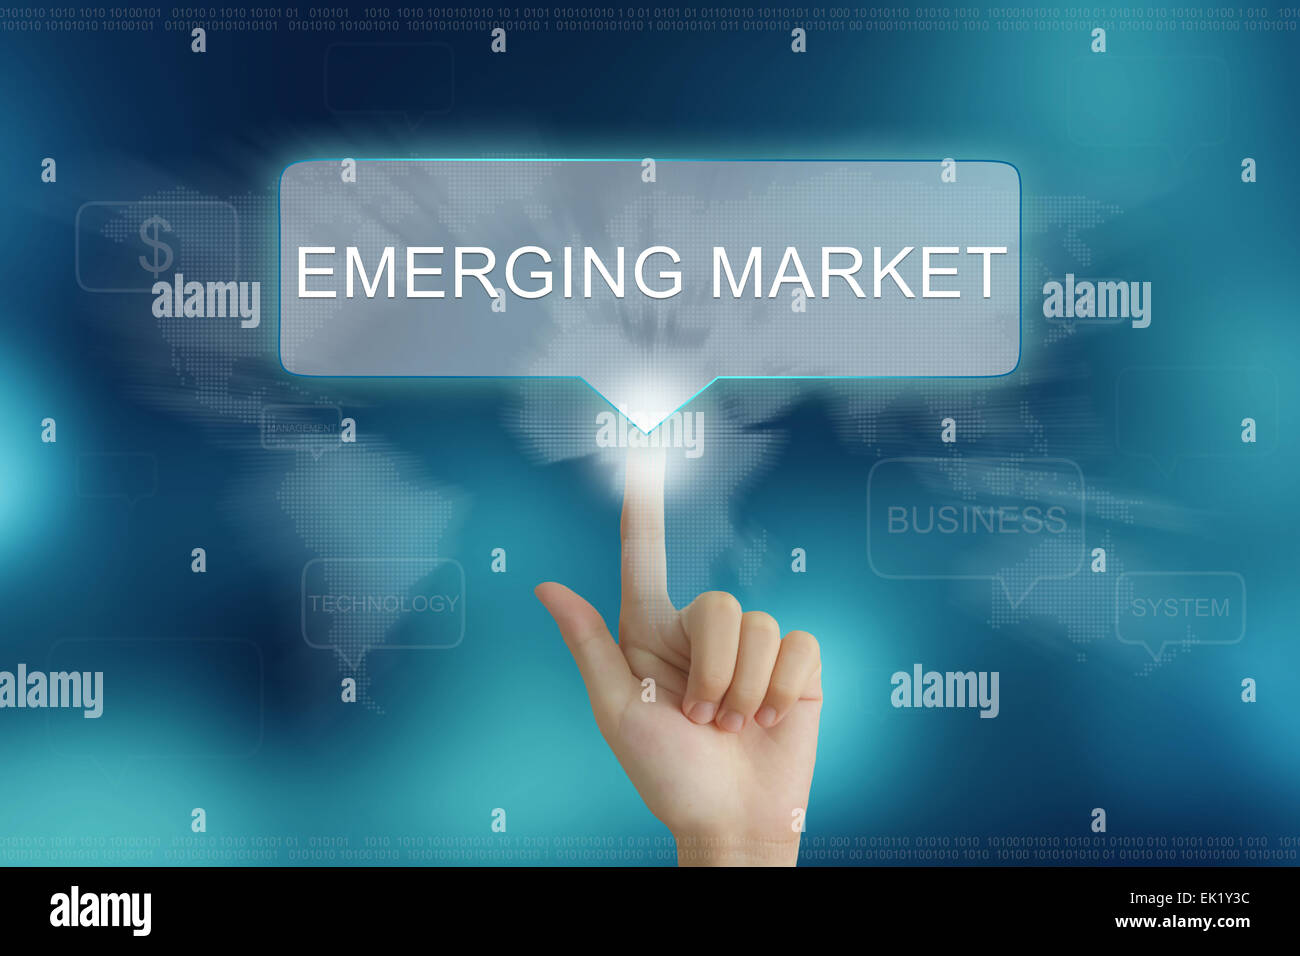 hand pushing on emerging market balloon text button Stock Photo